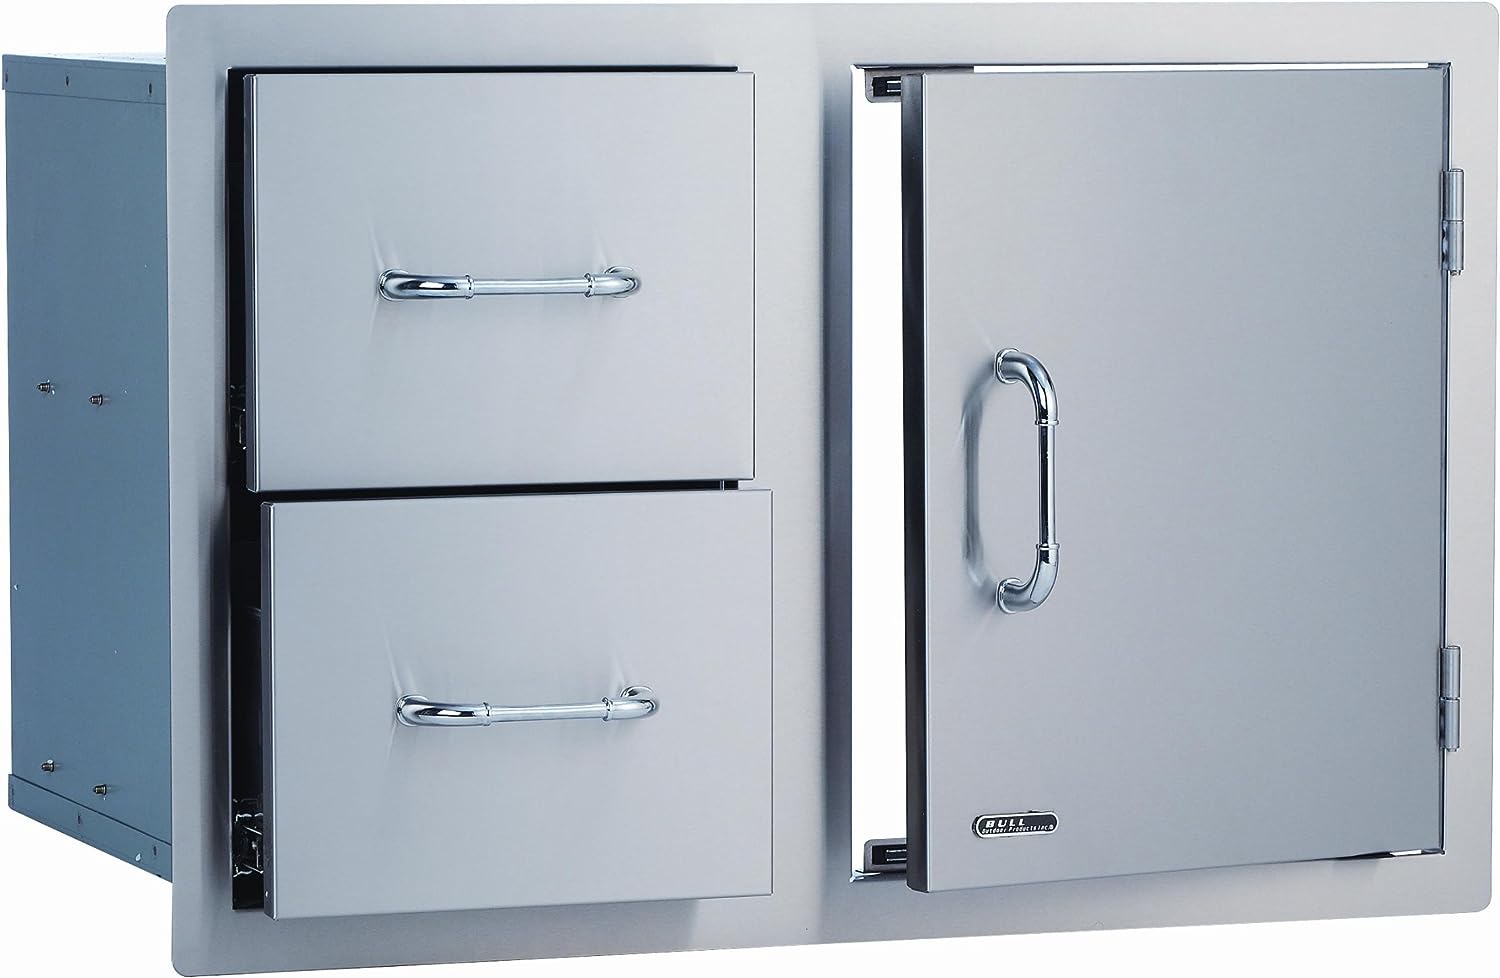 BULL OUTDOOR PRODUCTS 30" Stainless Steel Reversible Door/Drawer Combo